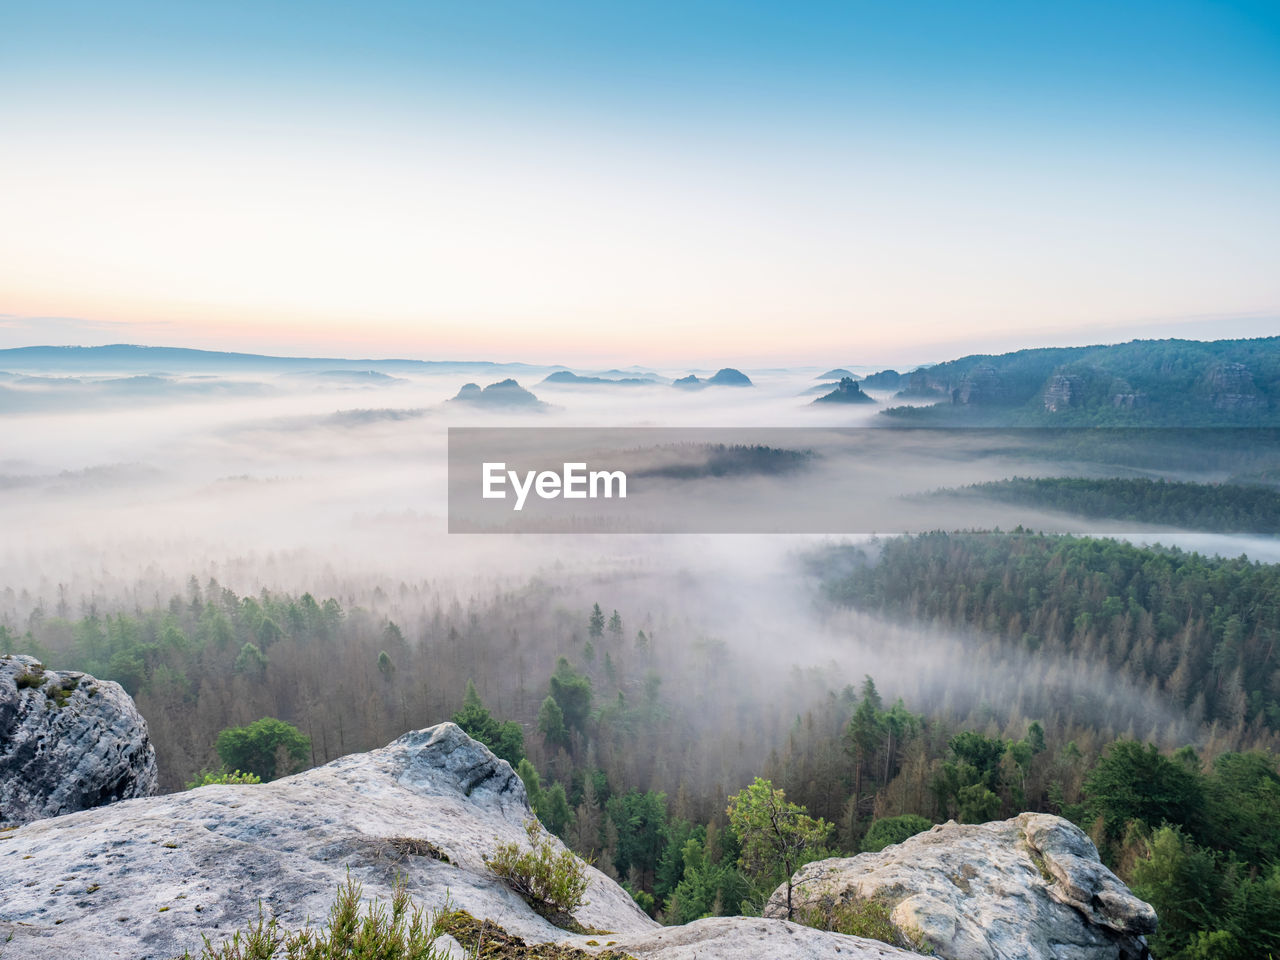 Picturesque sunrise and a foggy morning landscape in the bad schandau nature park region, europe